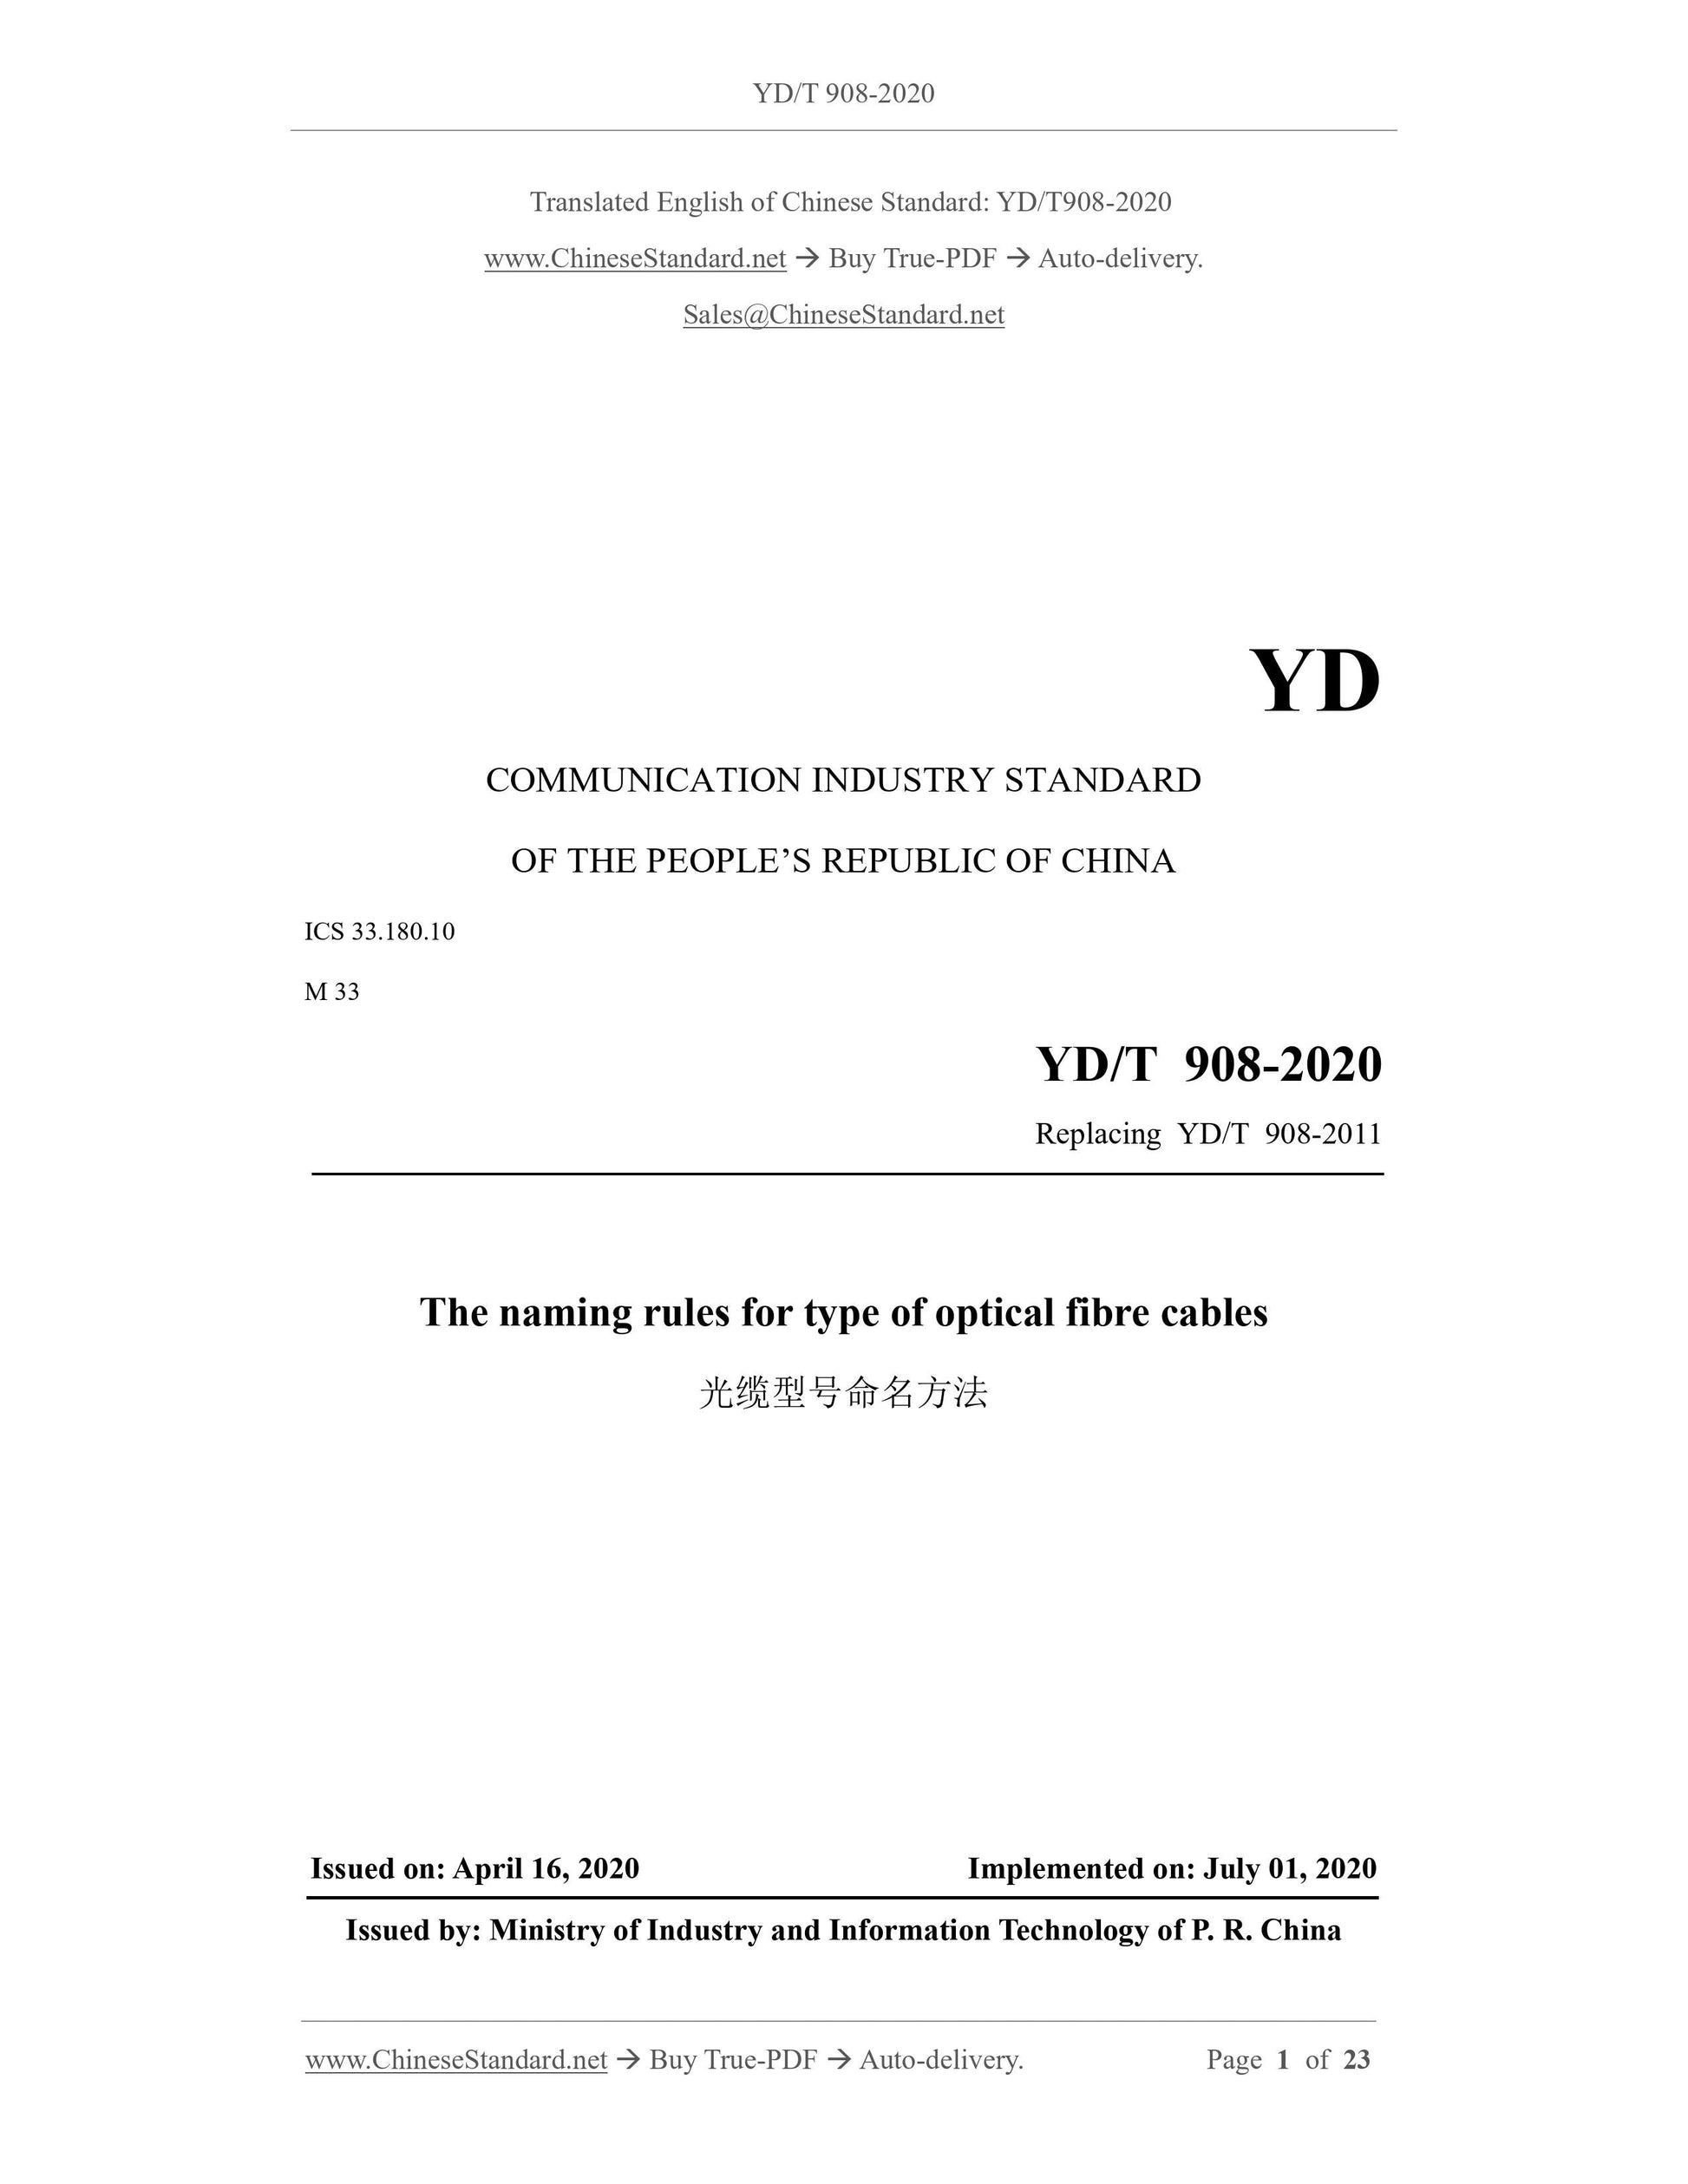 YD/T 908-2020 Page 1